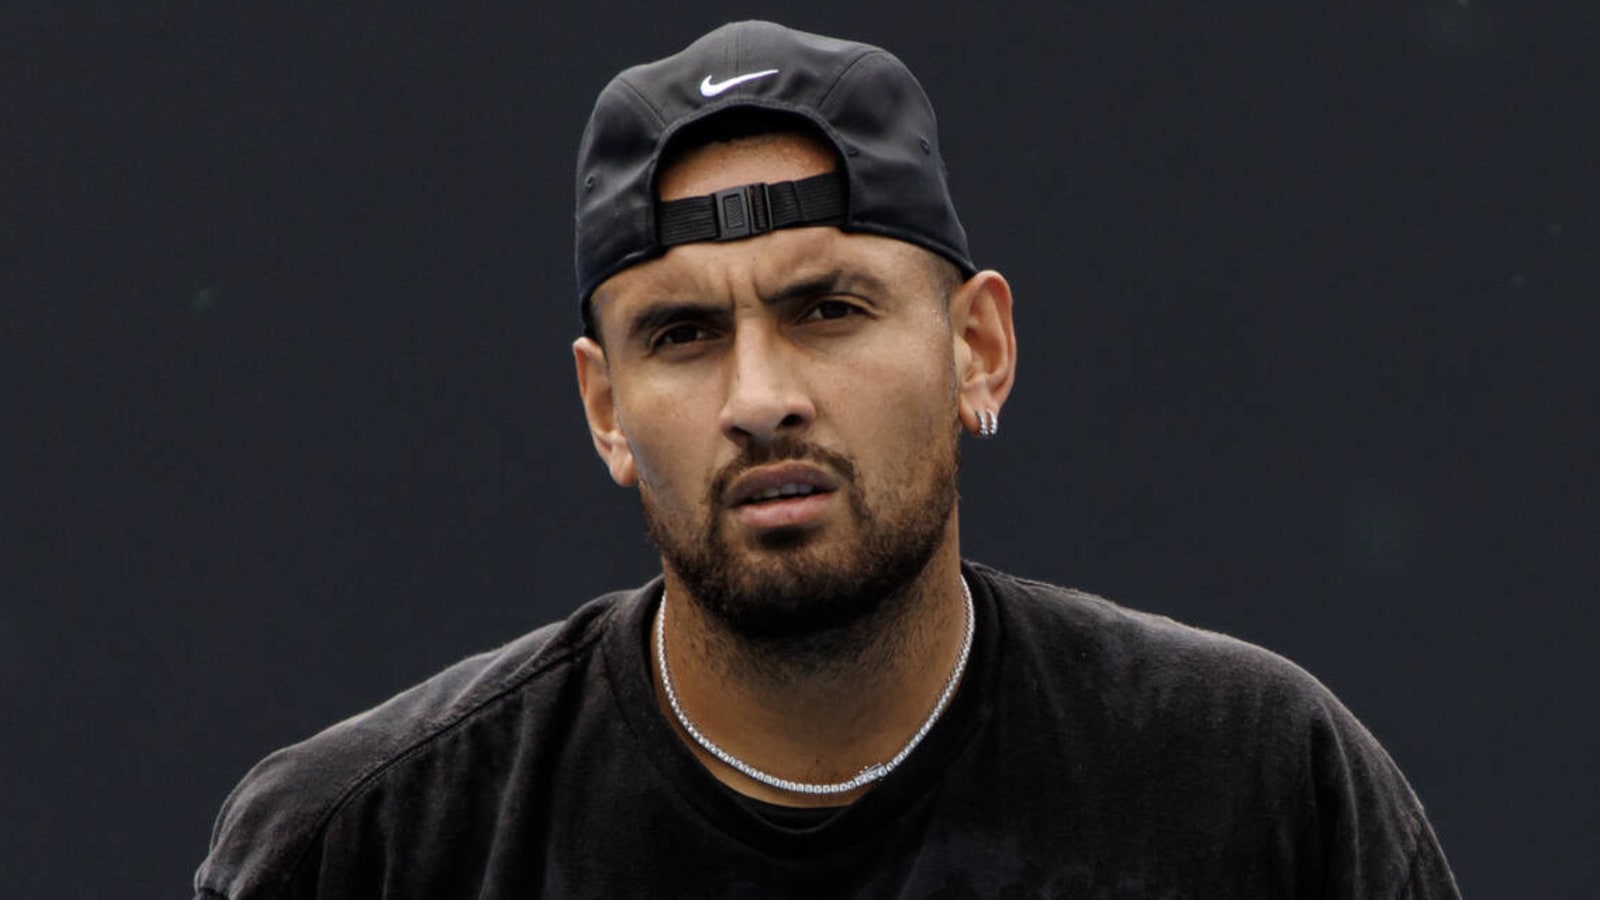 'What goes on behind closed doors,' Nick Kyrgios shares memories post 'insane' sessions at the den highlighting his tumultuous recovery as photographer stamps approval